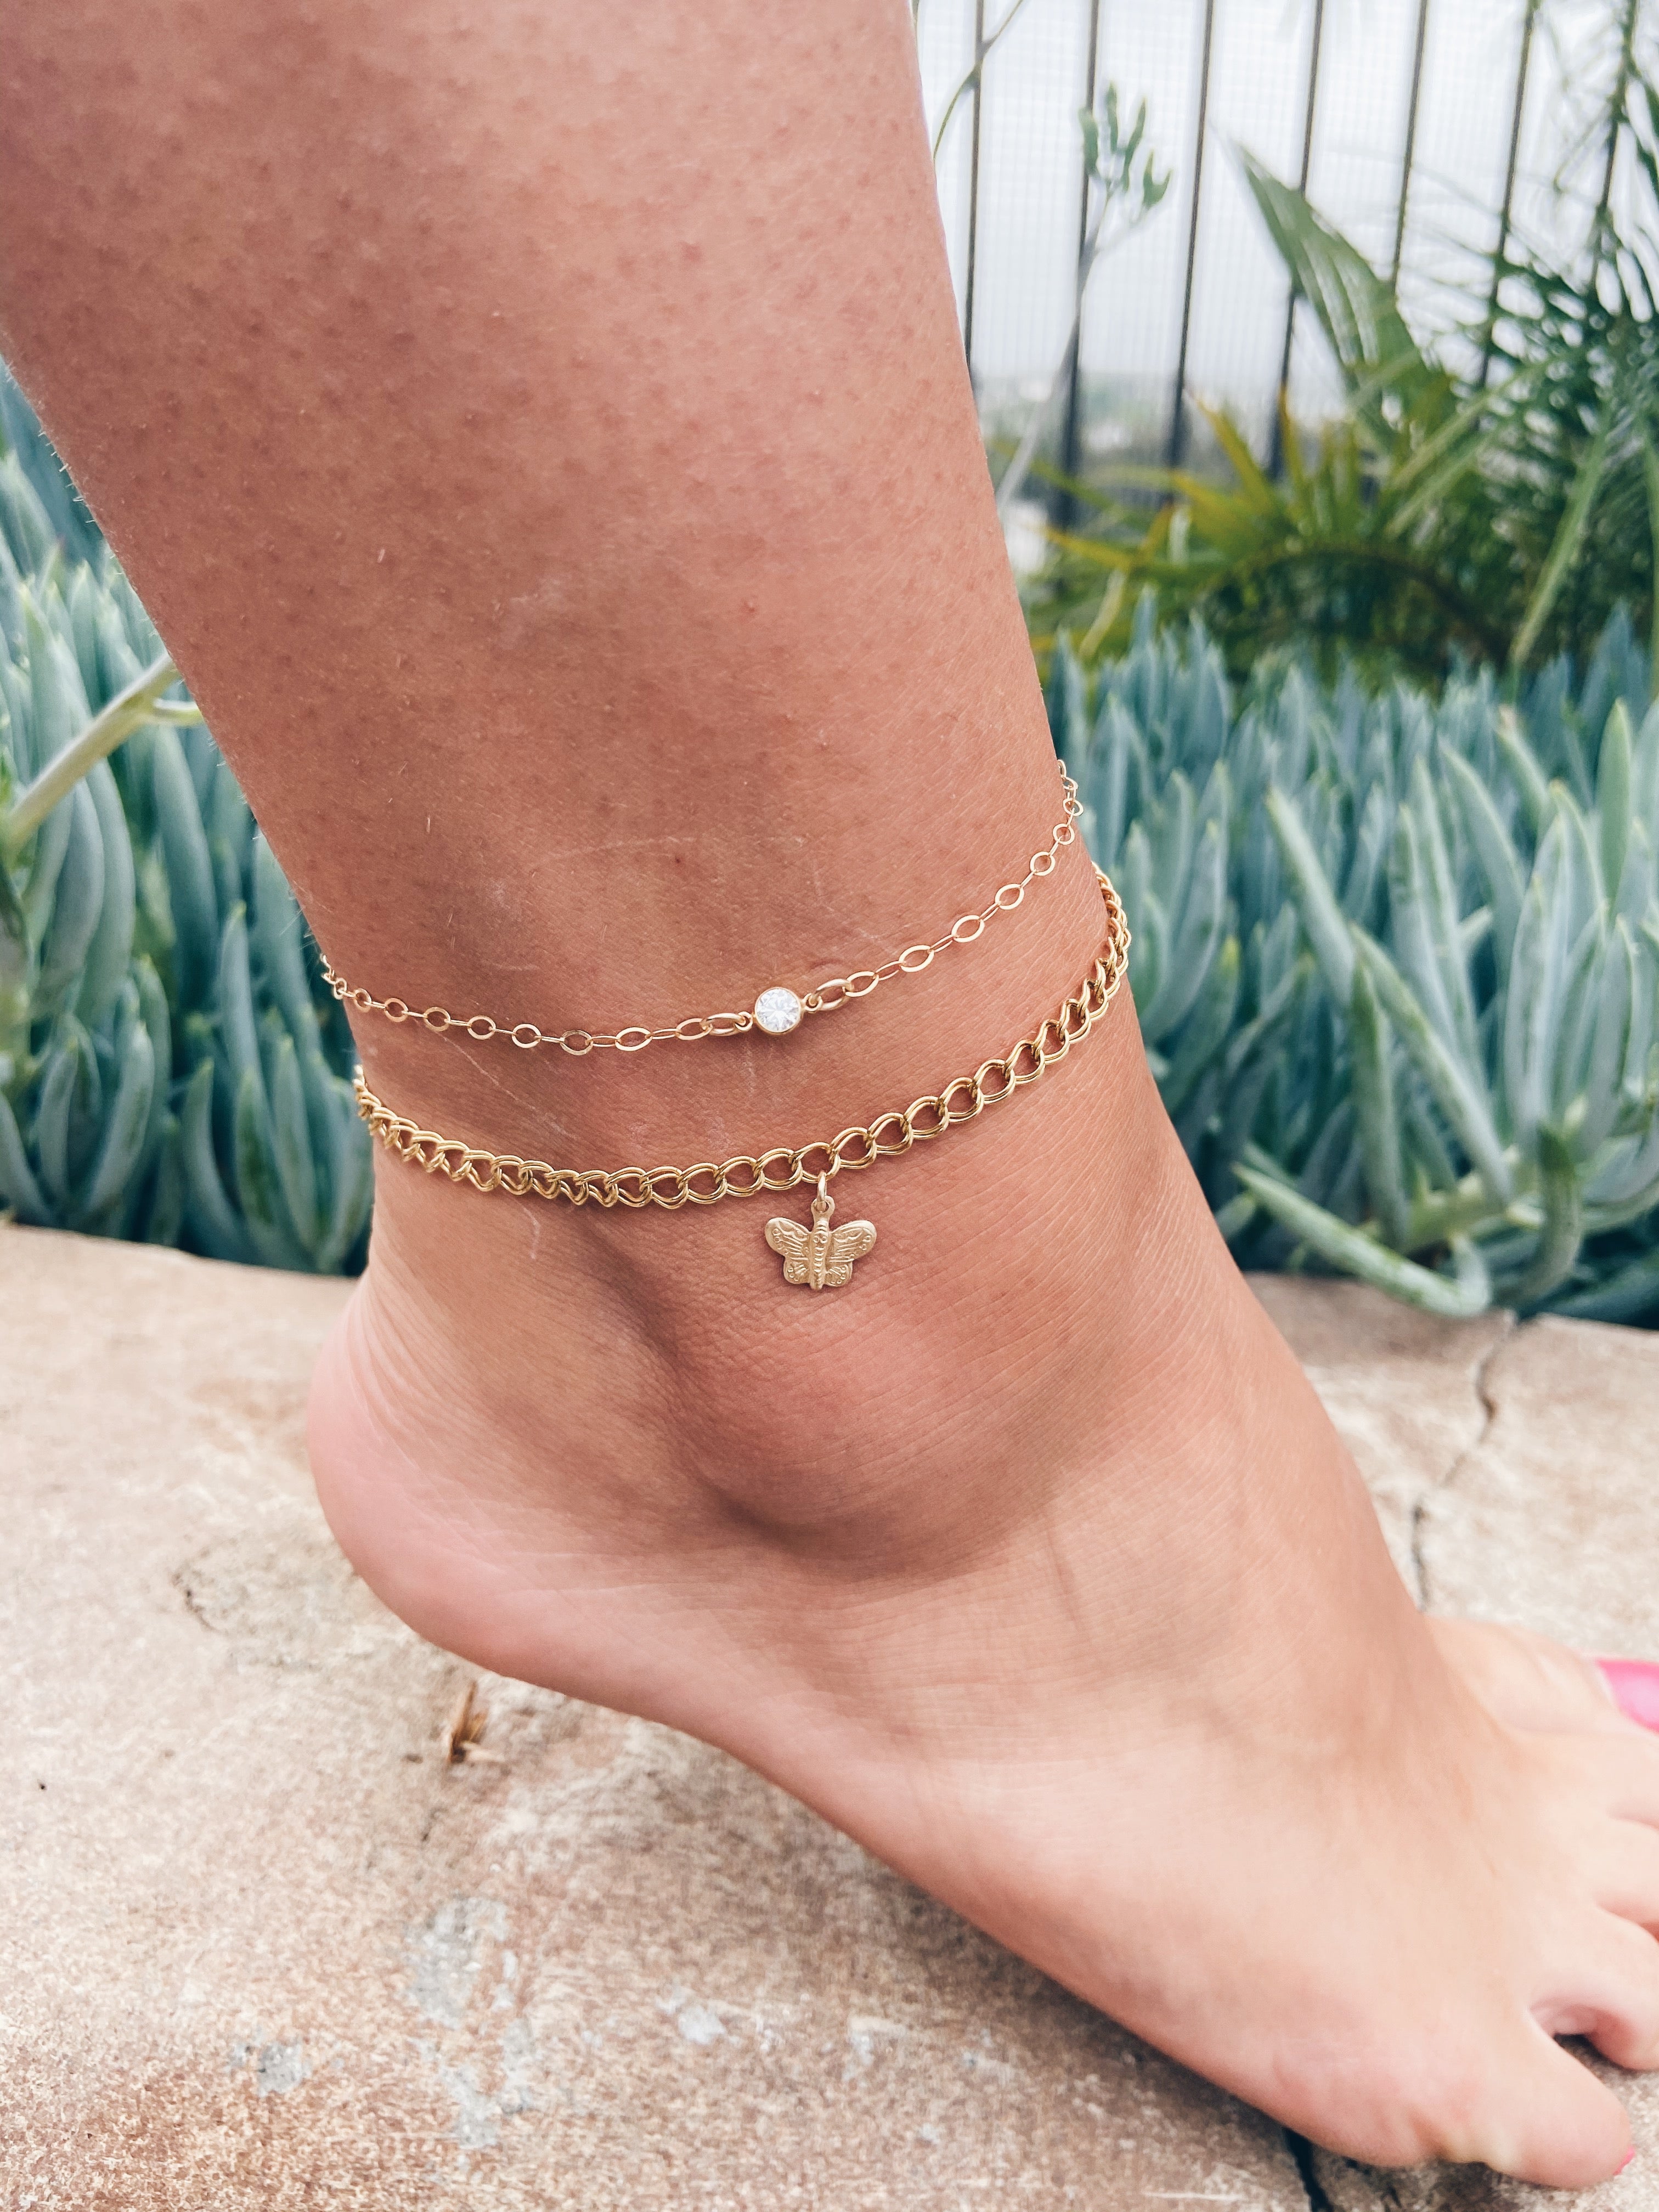 TINGN Initial Ankle Bracelets for Women 14K Gold Filled Dainty Heart  Initial Anklet Foot Jewelry Gold Anklets for Women Teen Girls Summer Gifts  - Walmart.com